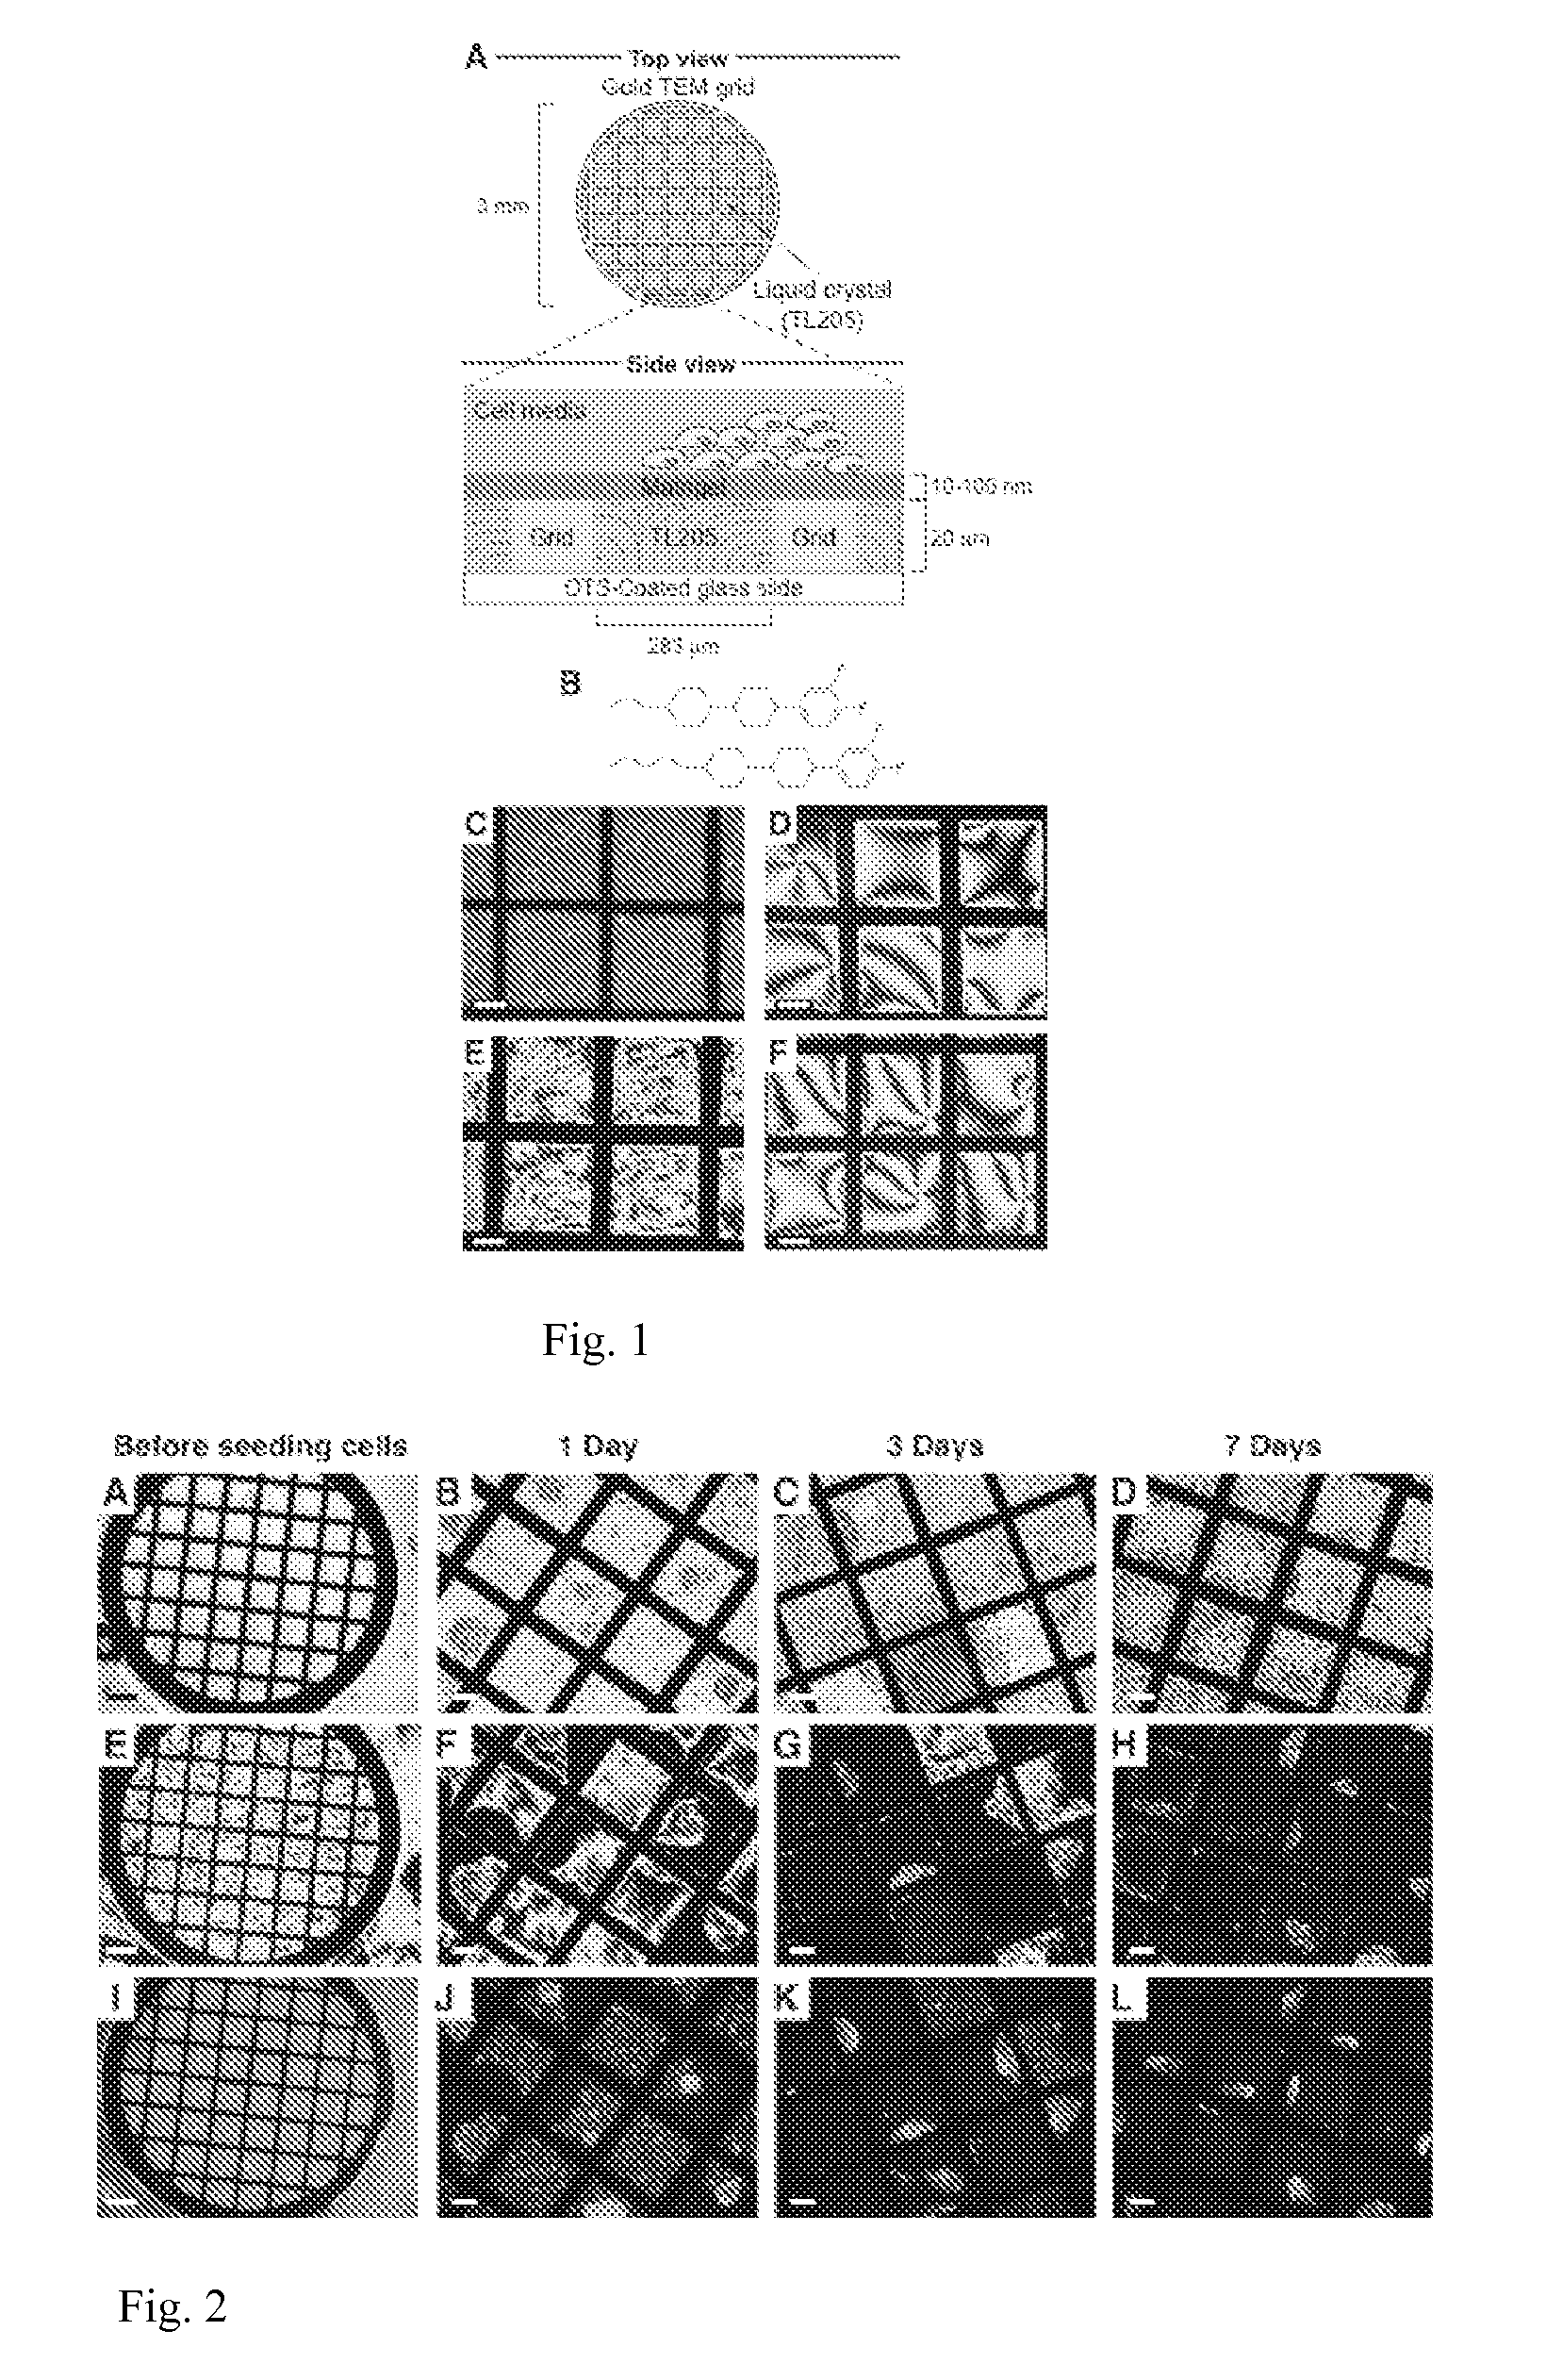 Liquid crystalline substrates for culturing cells